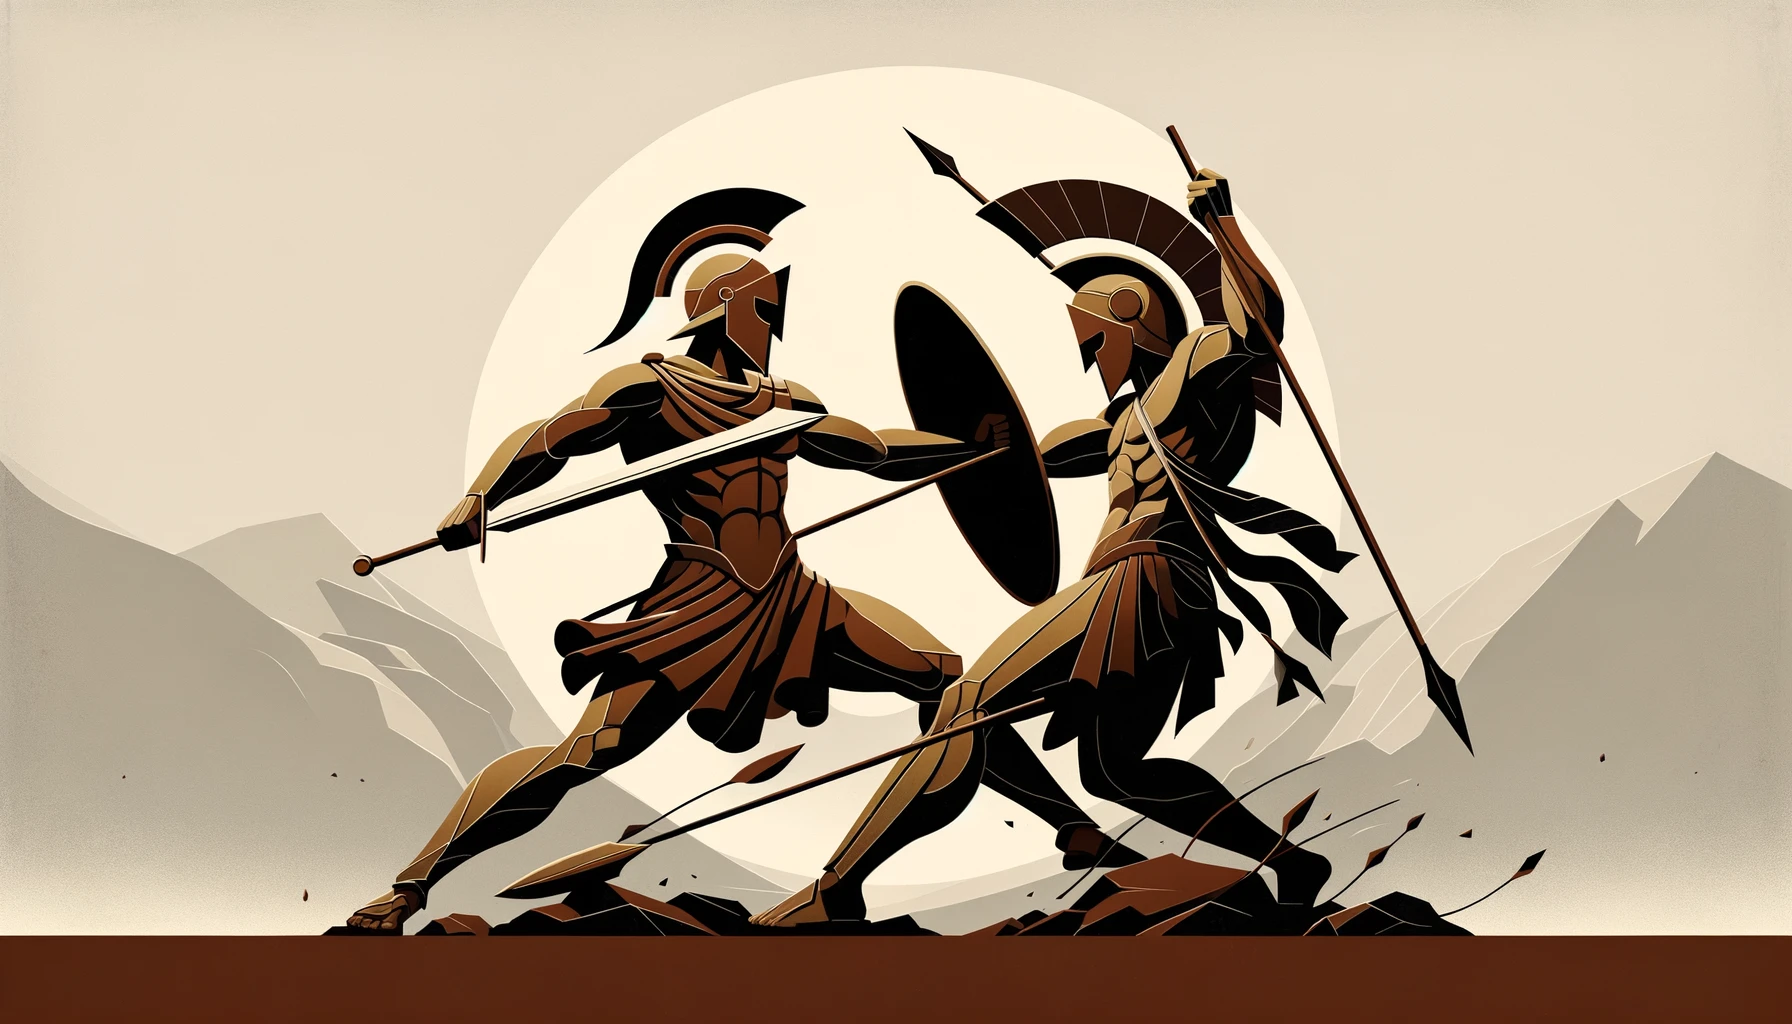 Perseus vs. Meleager: A Tale of Heroic Deeds and Tragic Fates